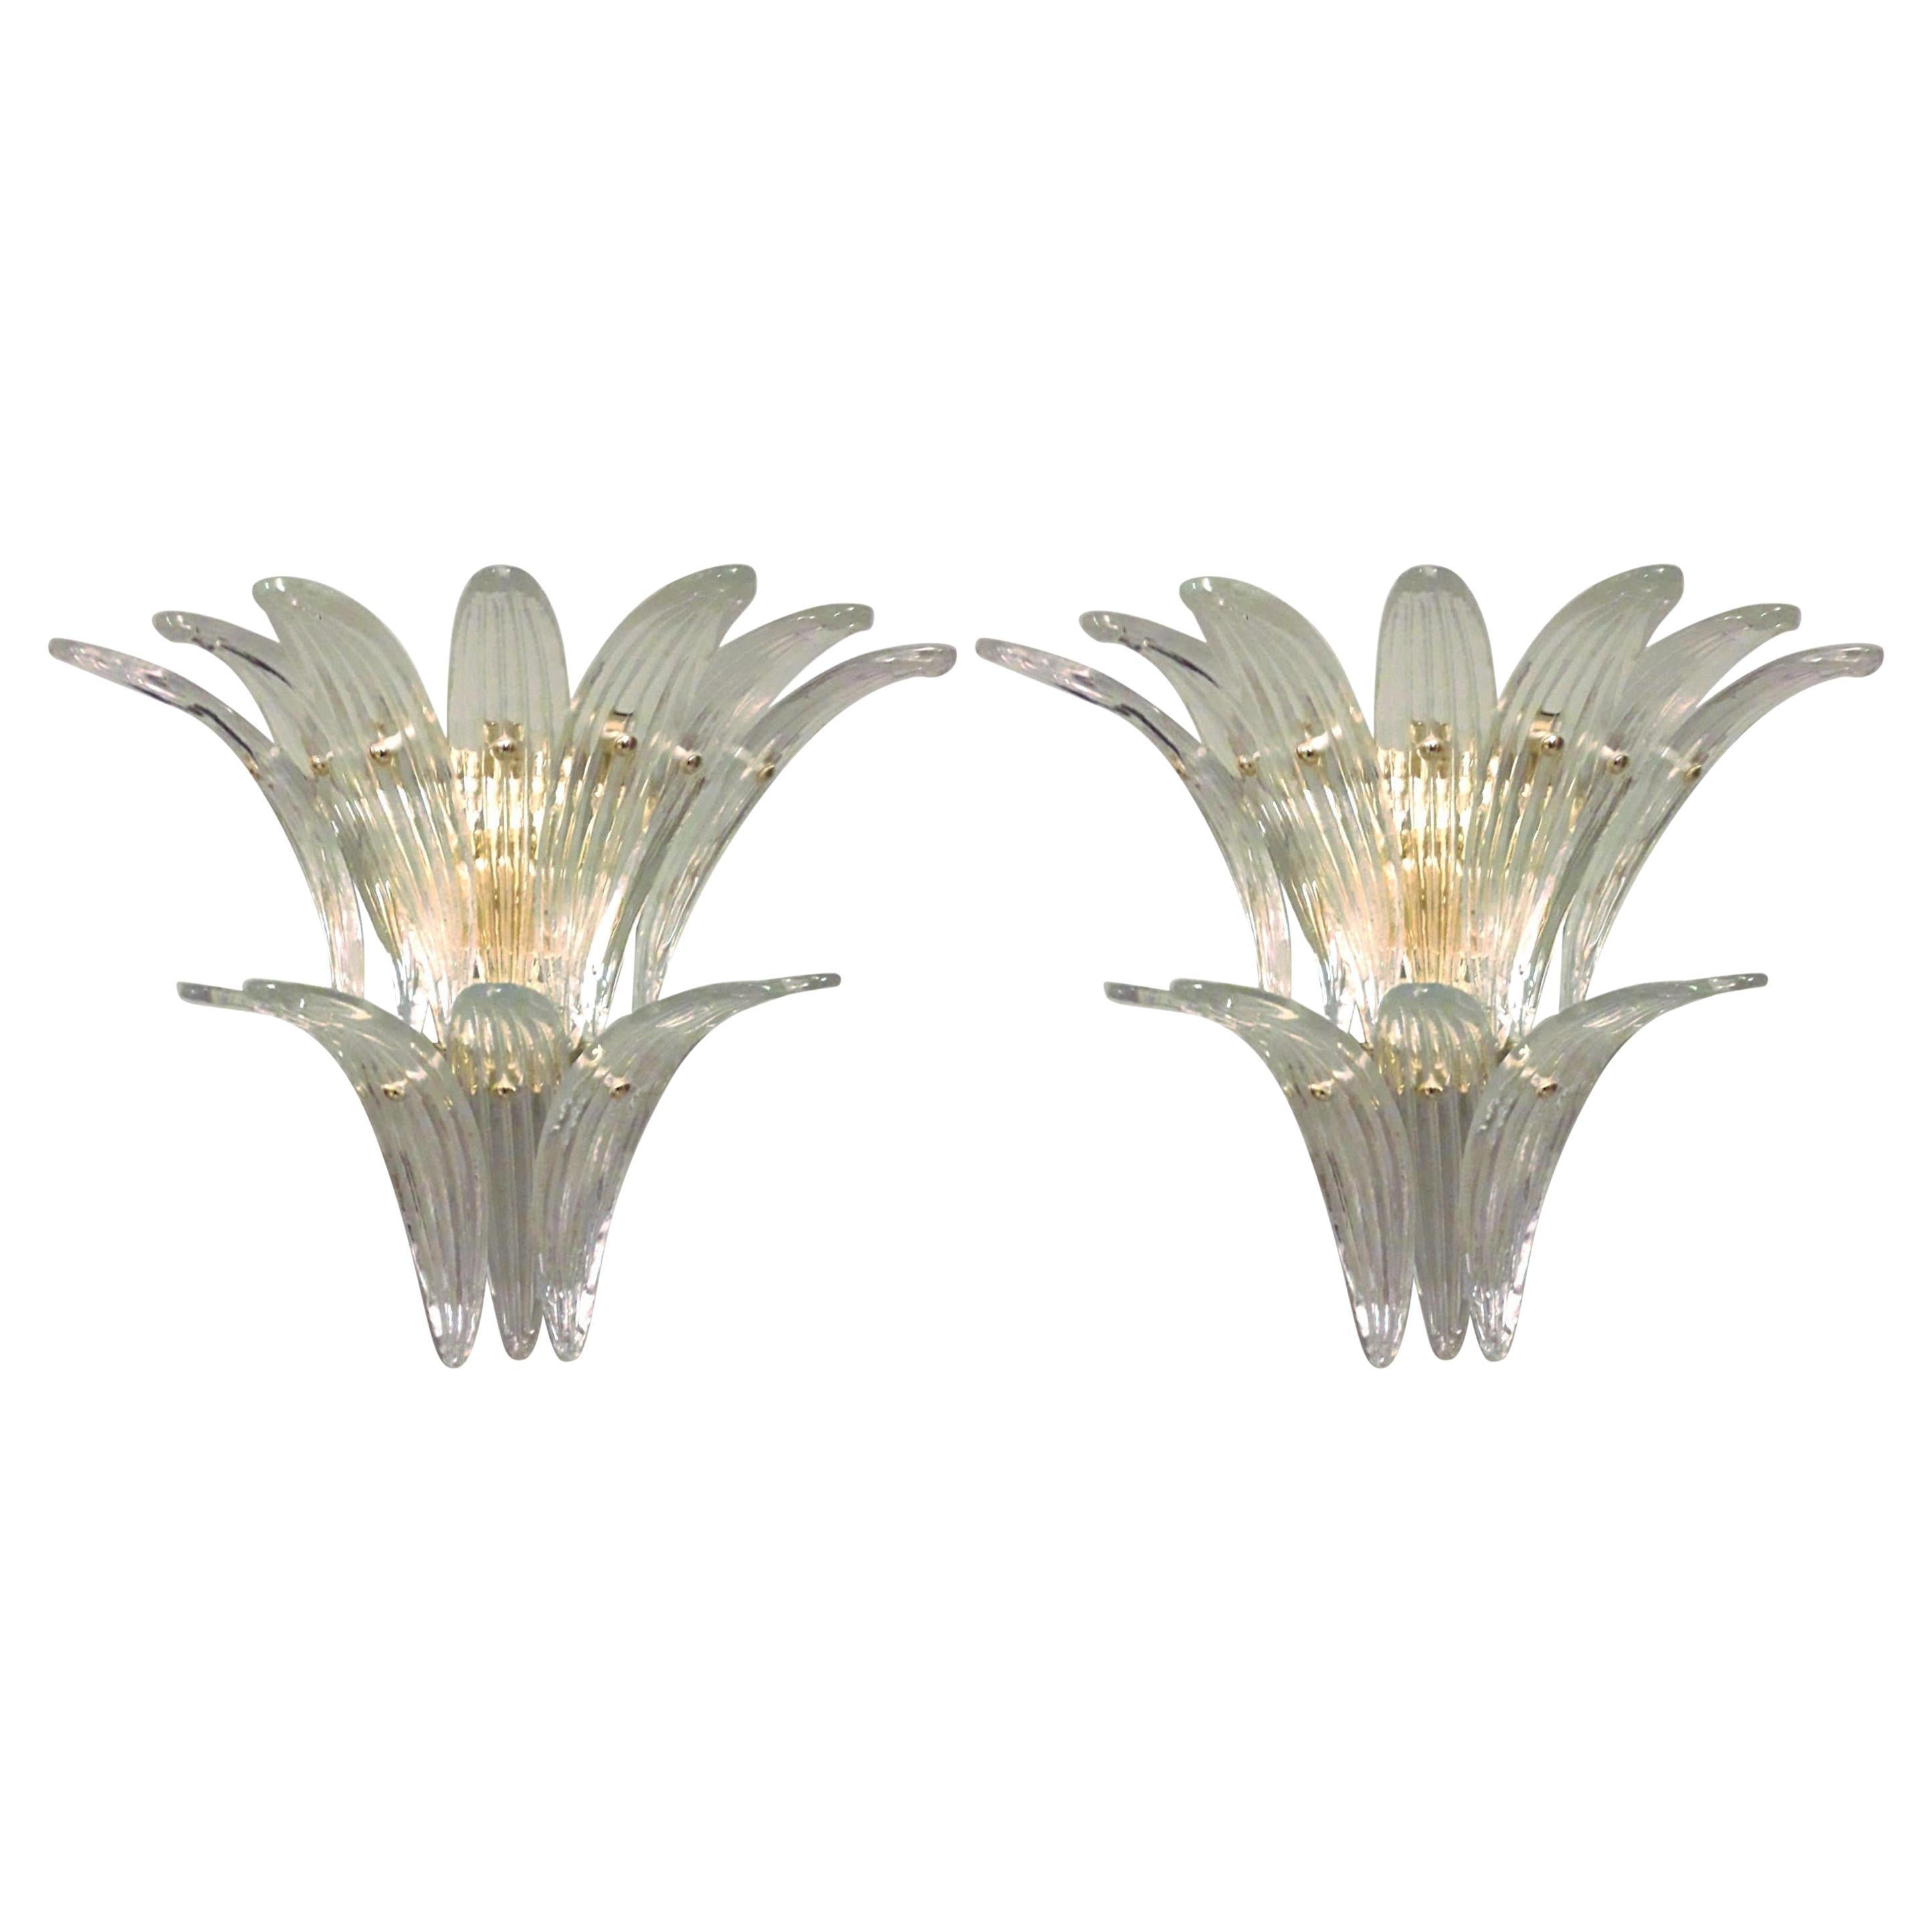 Pair of Two Tier Palmette Sconces, 2 Pairs Available